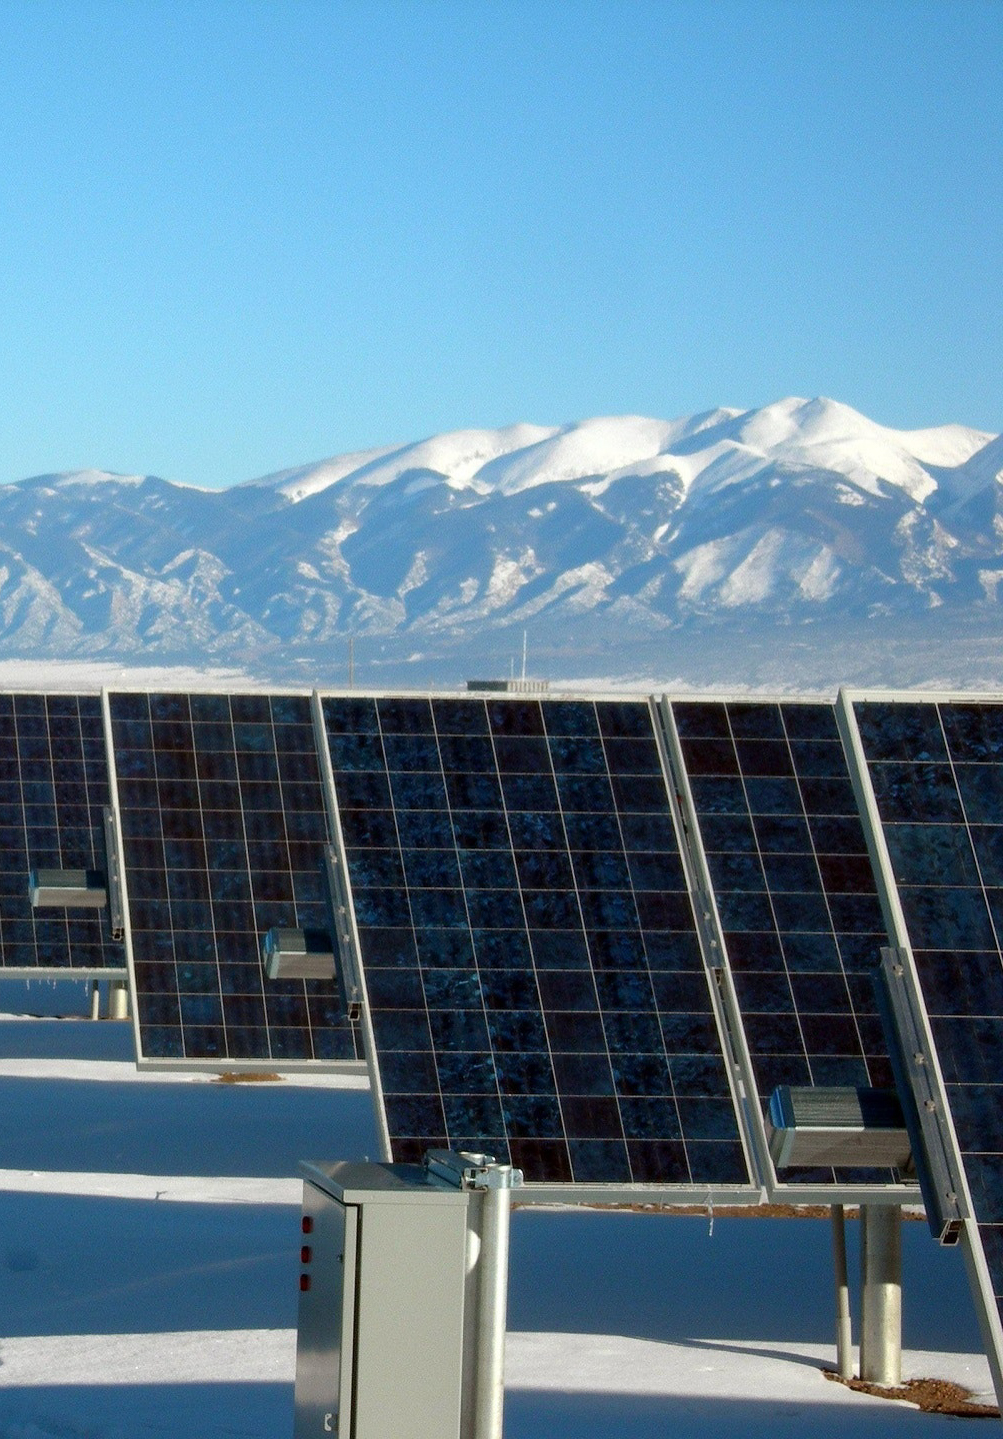 silver-and-black-solar-panels-on-snow-covered-ground-159160-2